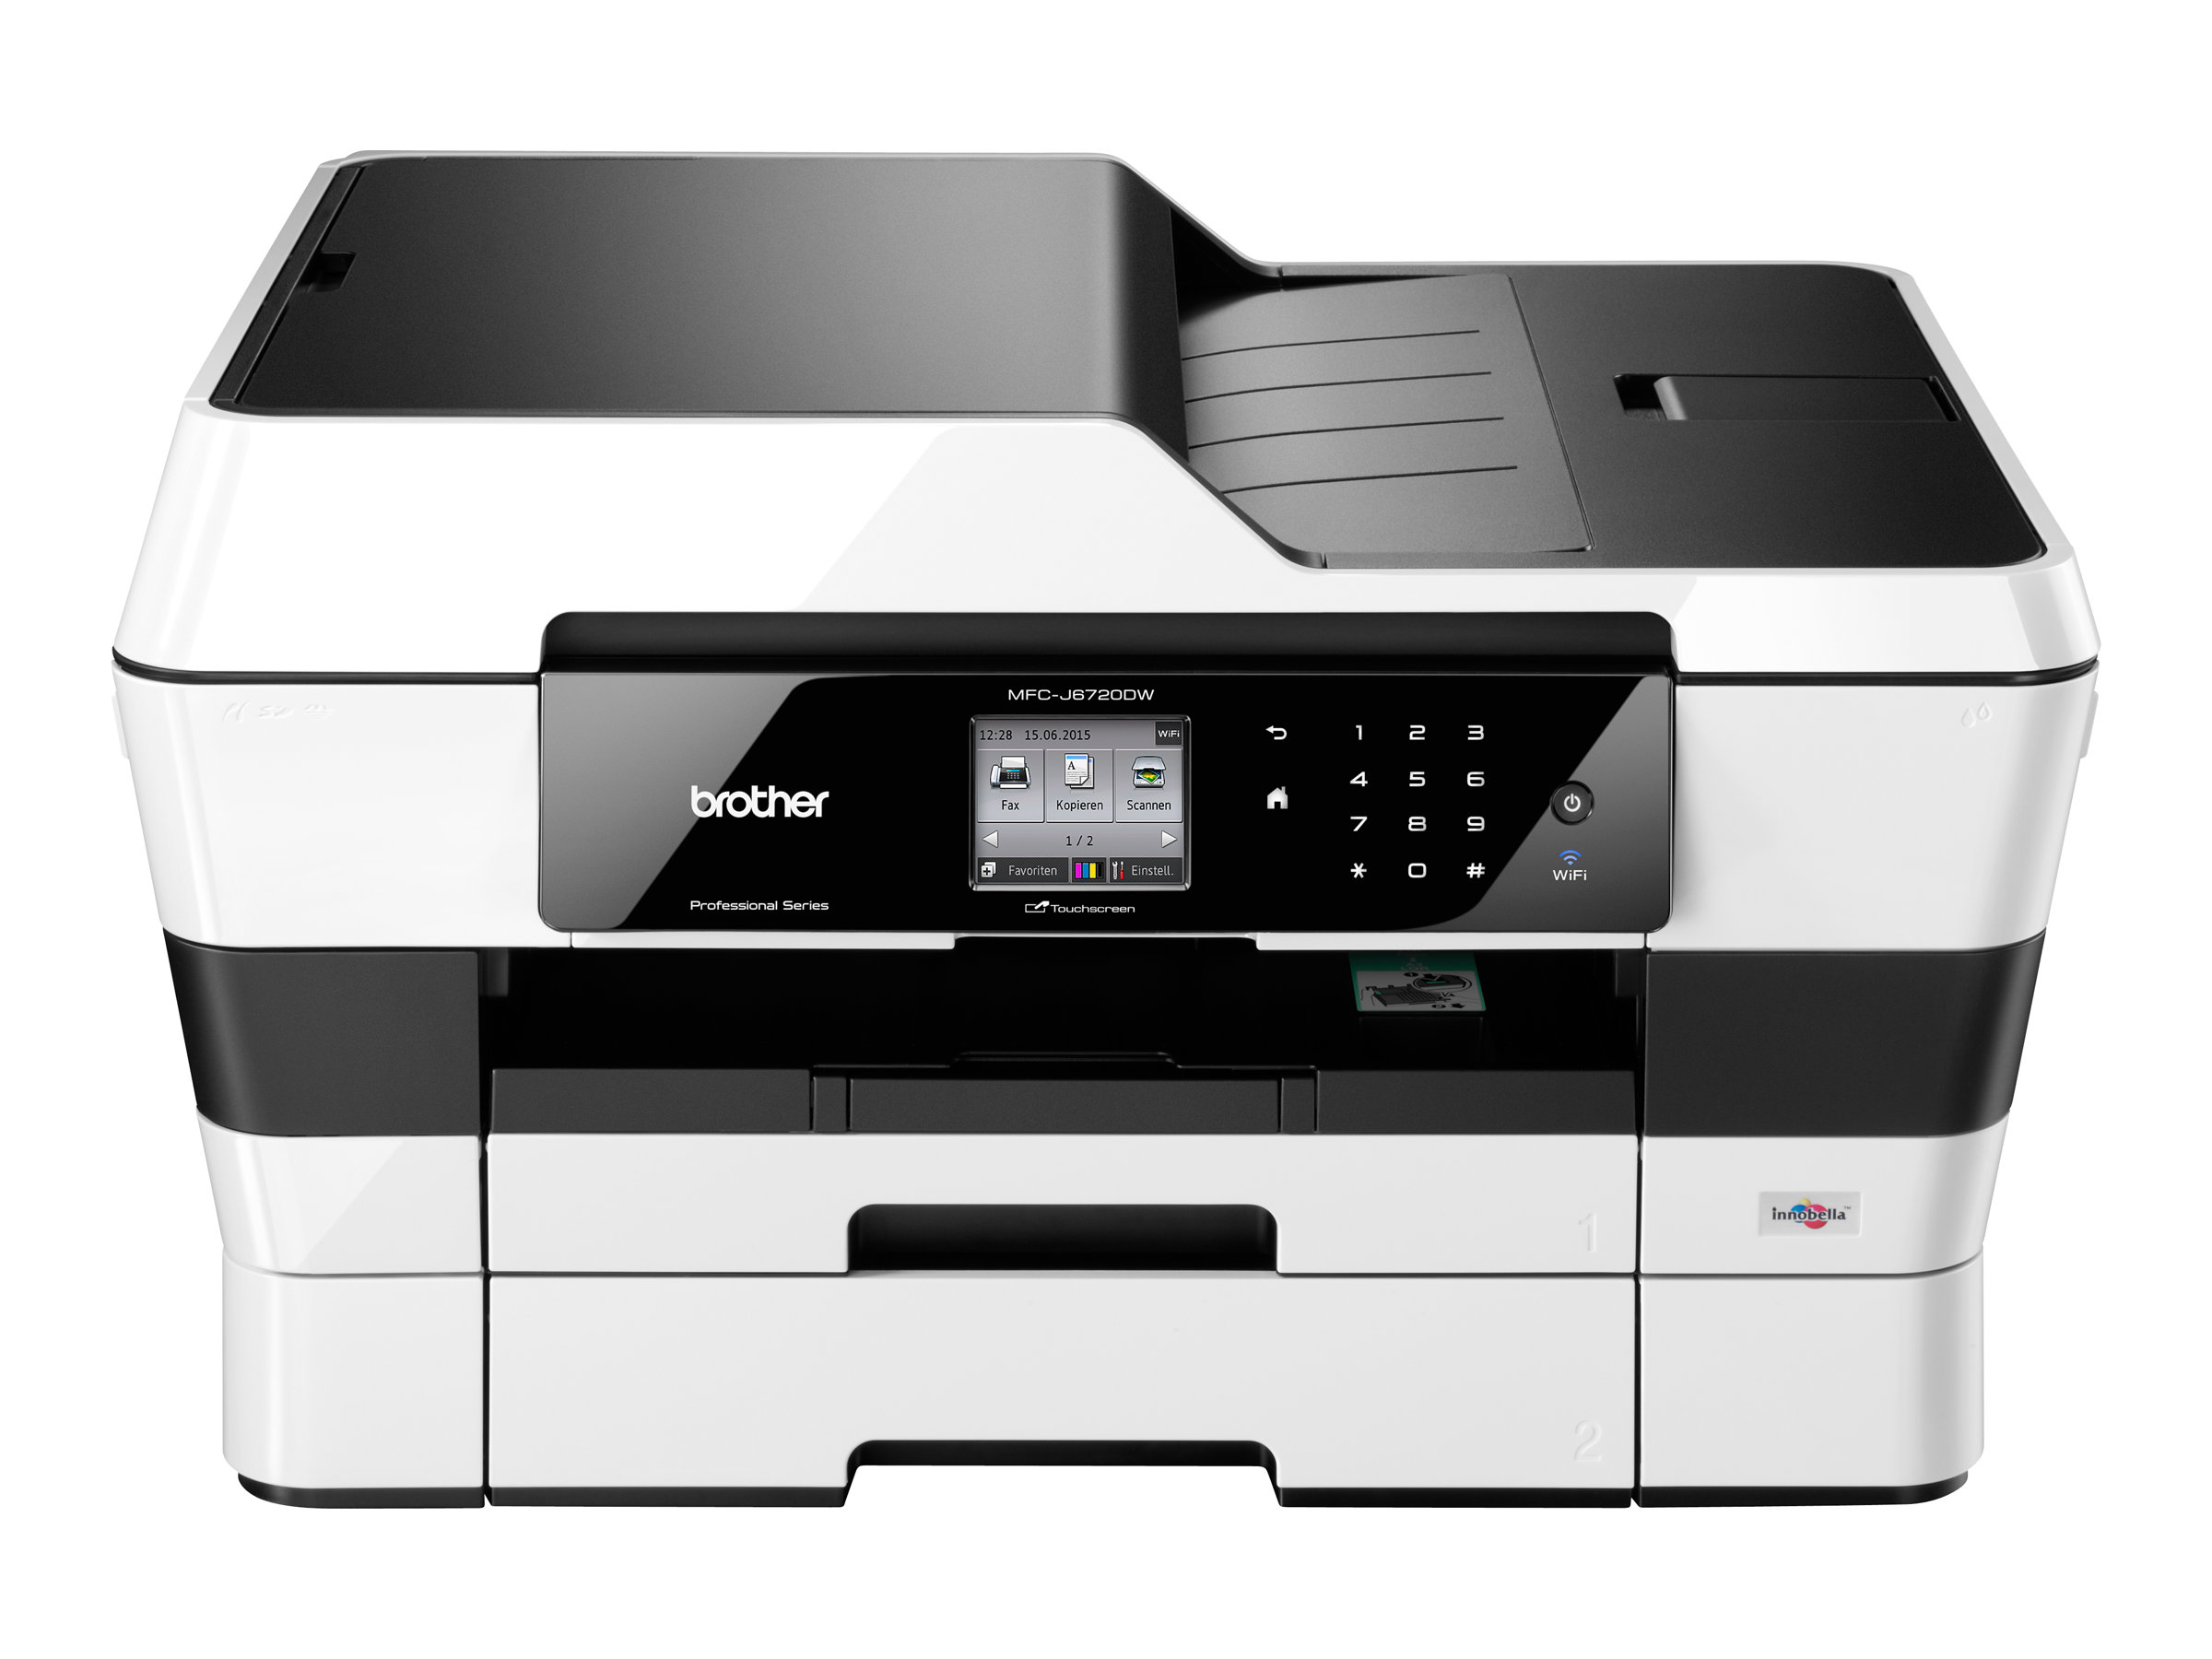 Brother MFC-J6720DW Wireless Inkjet Color Printer with Scanner, Copier and Fax - image 4 of 11